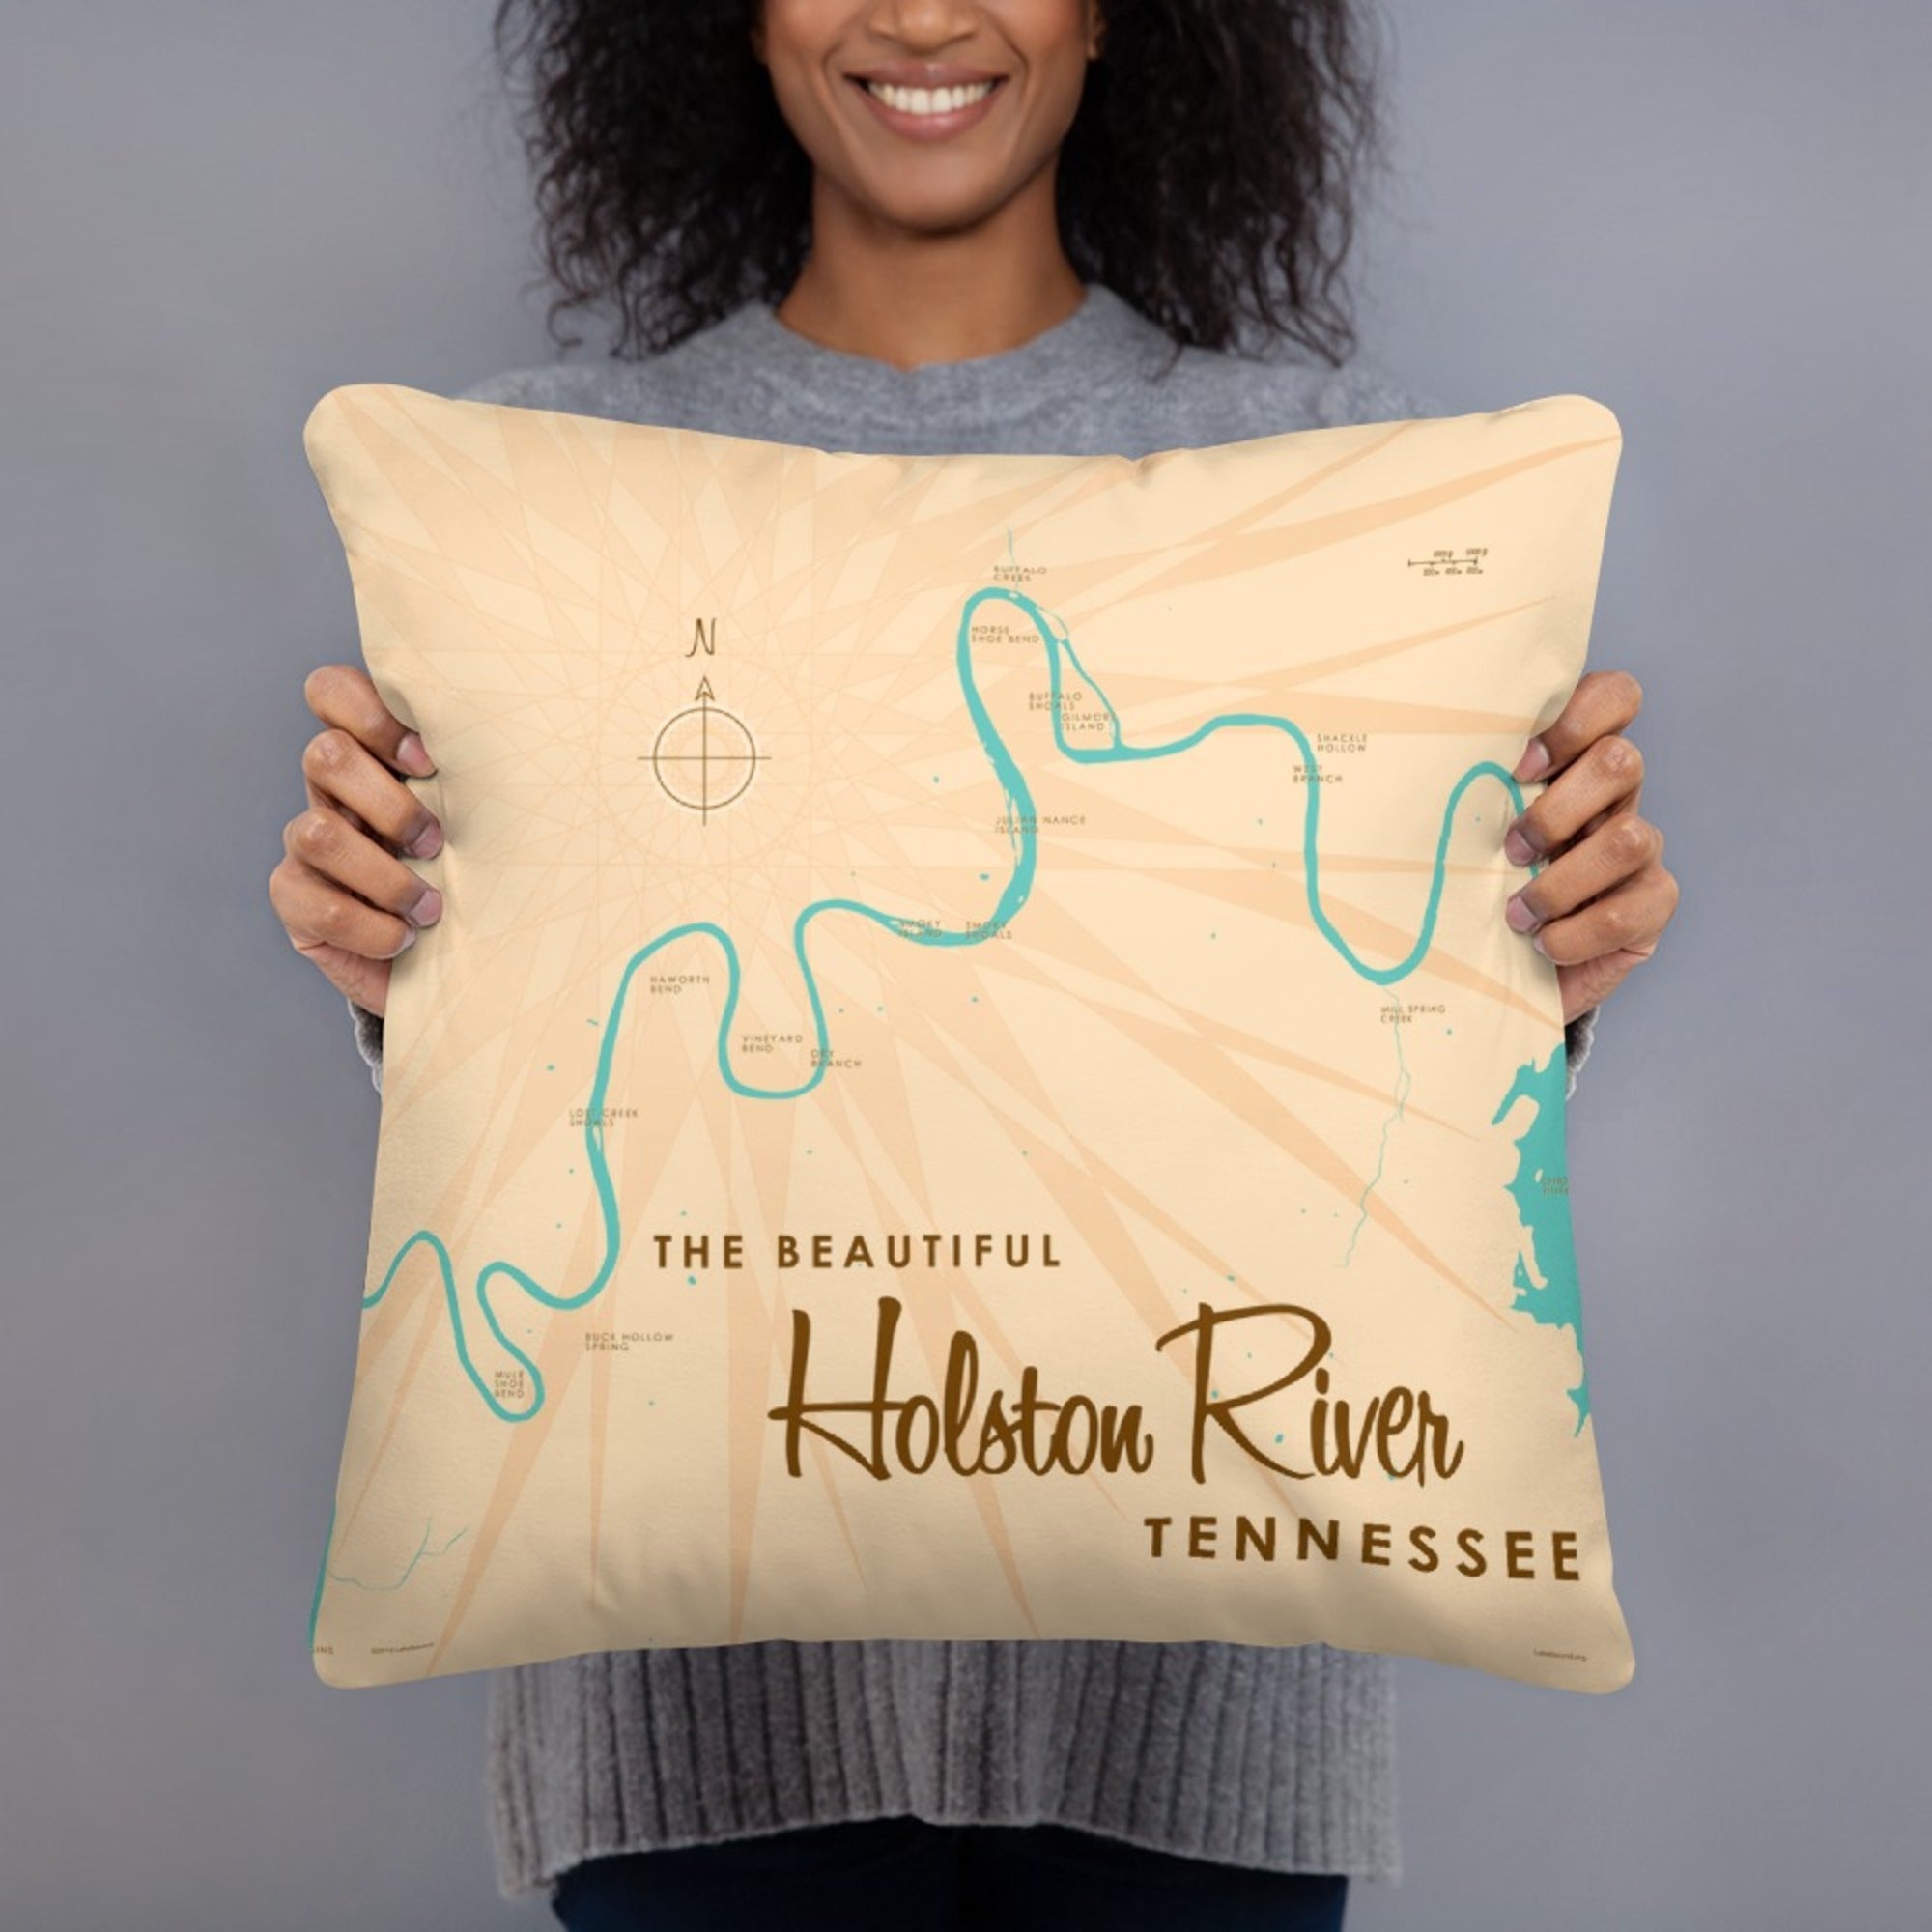 Holston River Tennessee Pillow